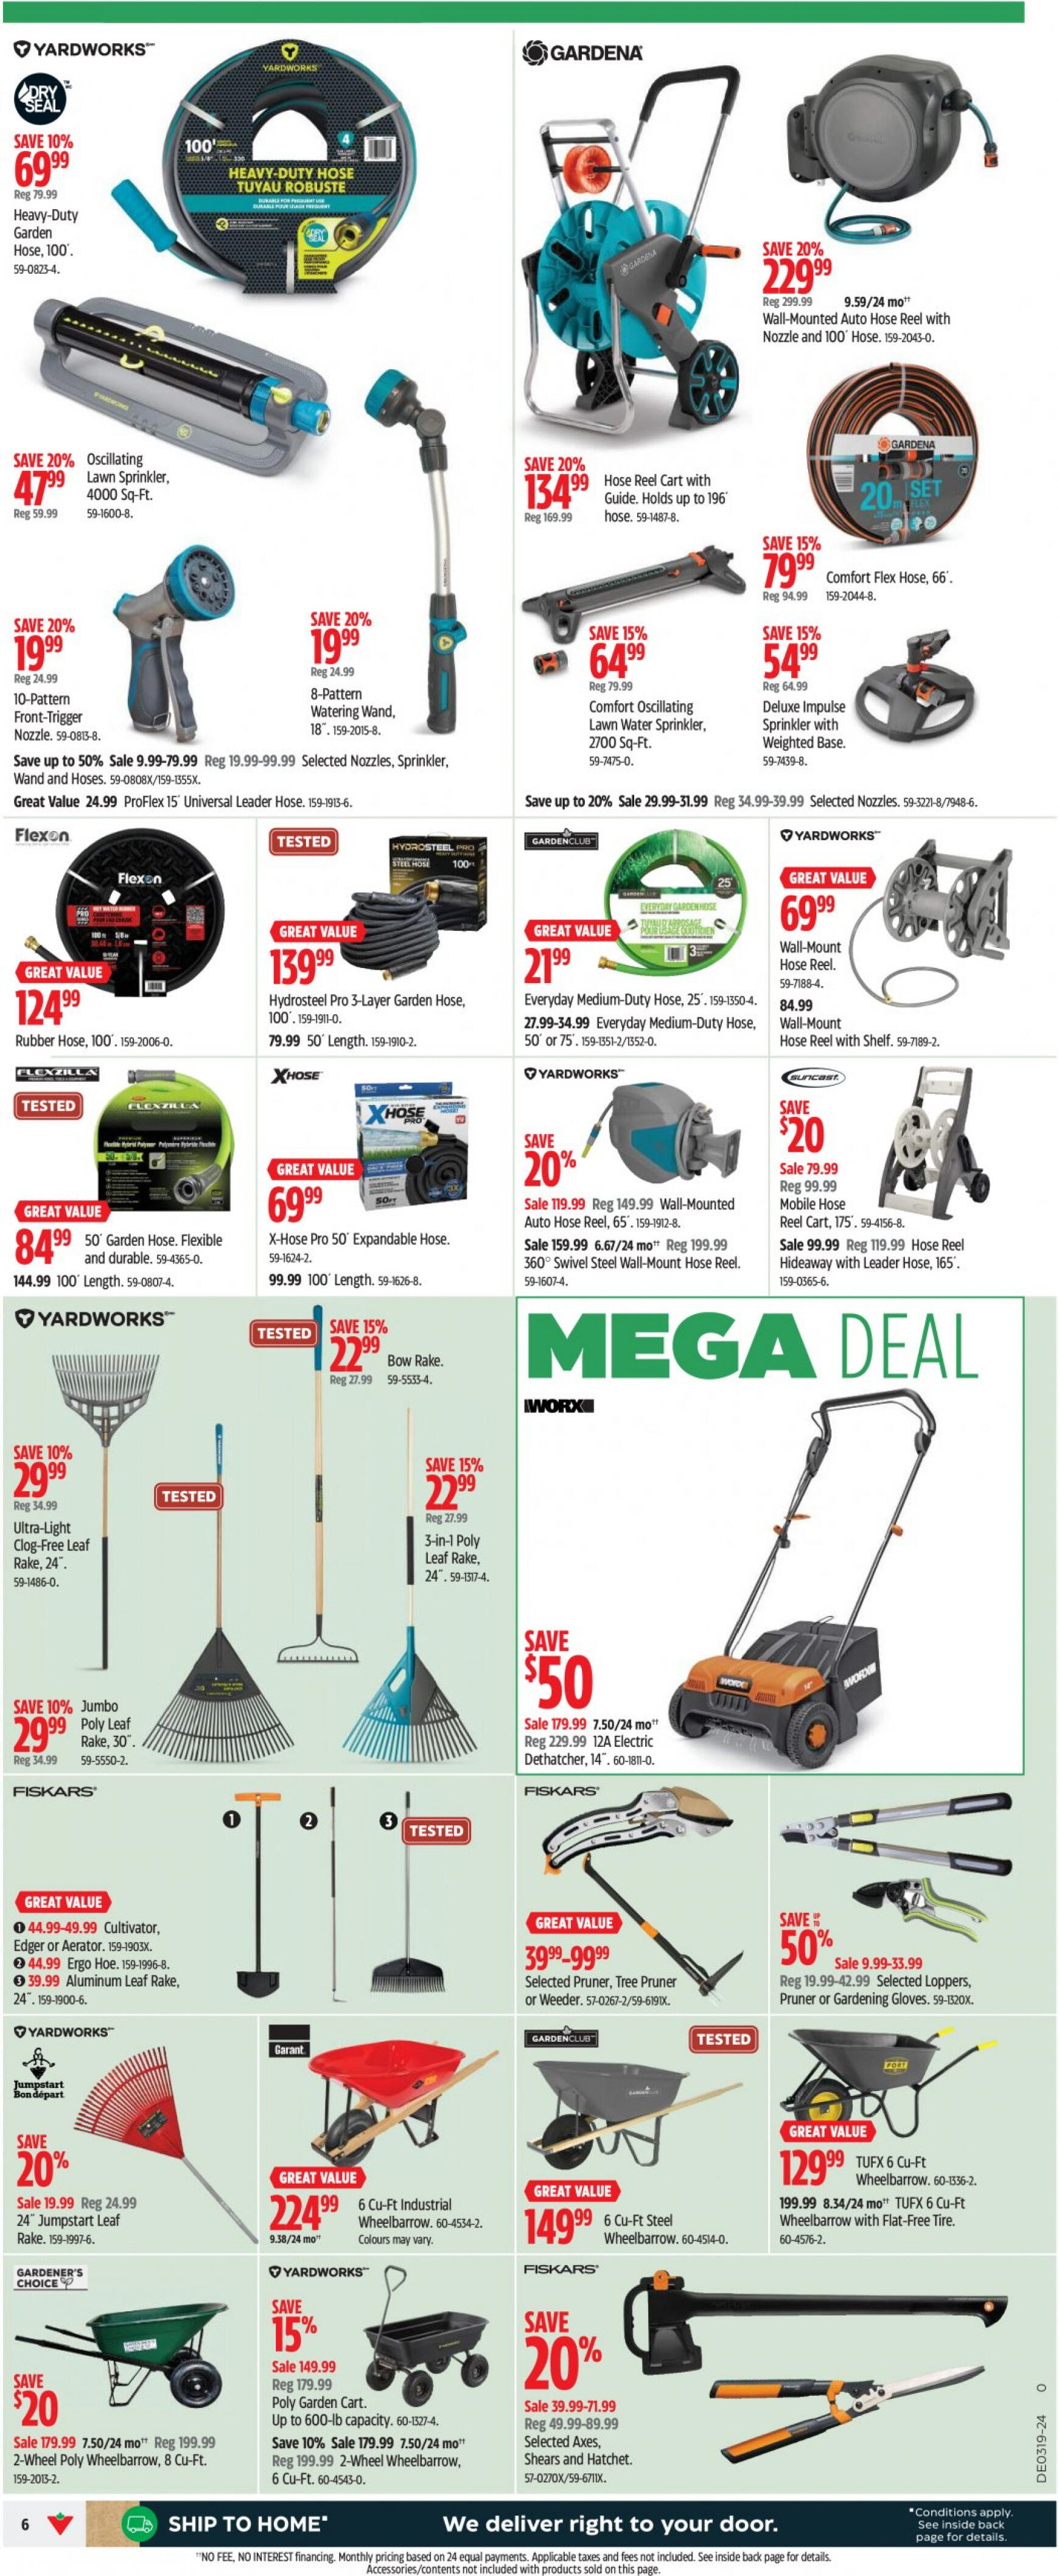 canadian-tire - Canadian Tire flyer current 02.05. - 08.05. - page: 6